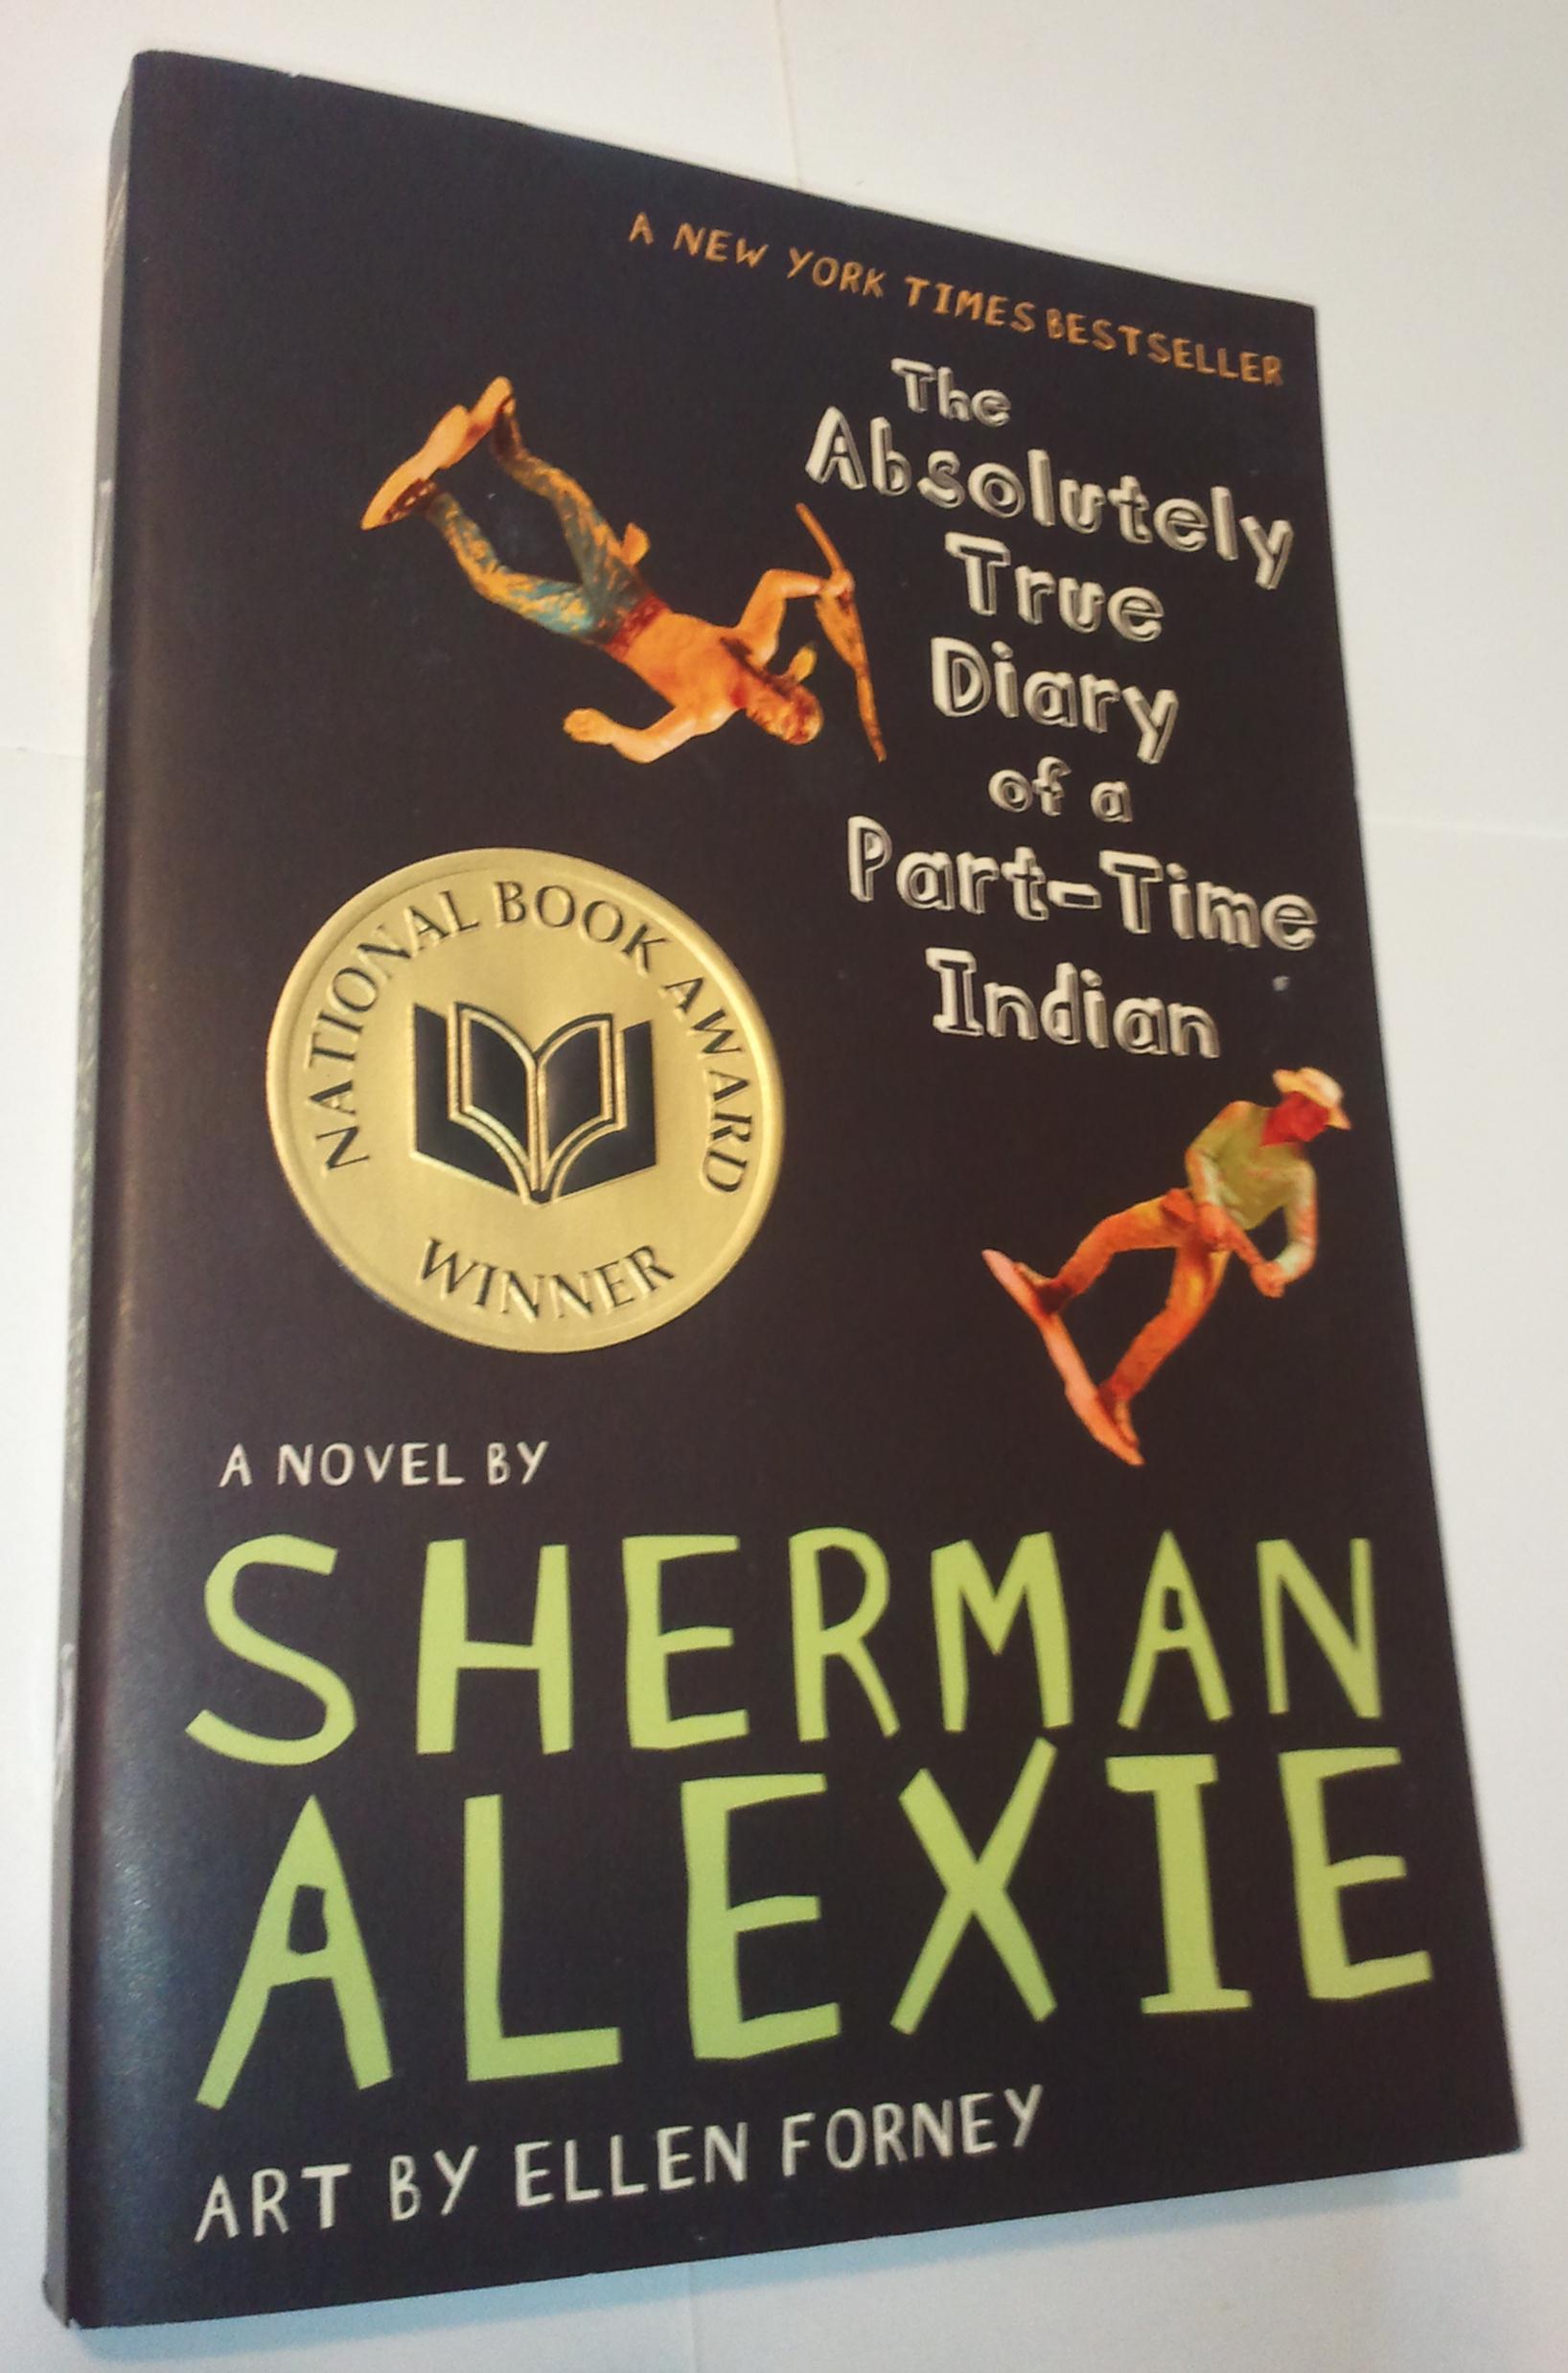 the absolutely true diary of a part time indian by sherman alexie